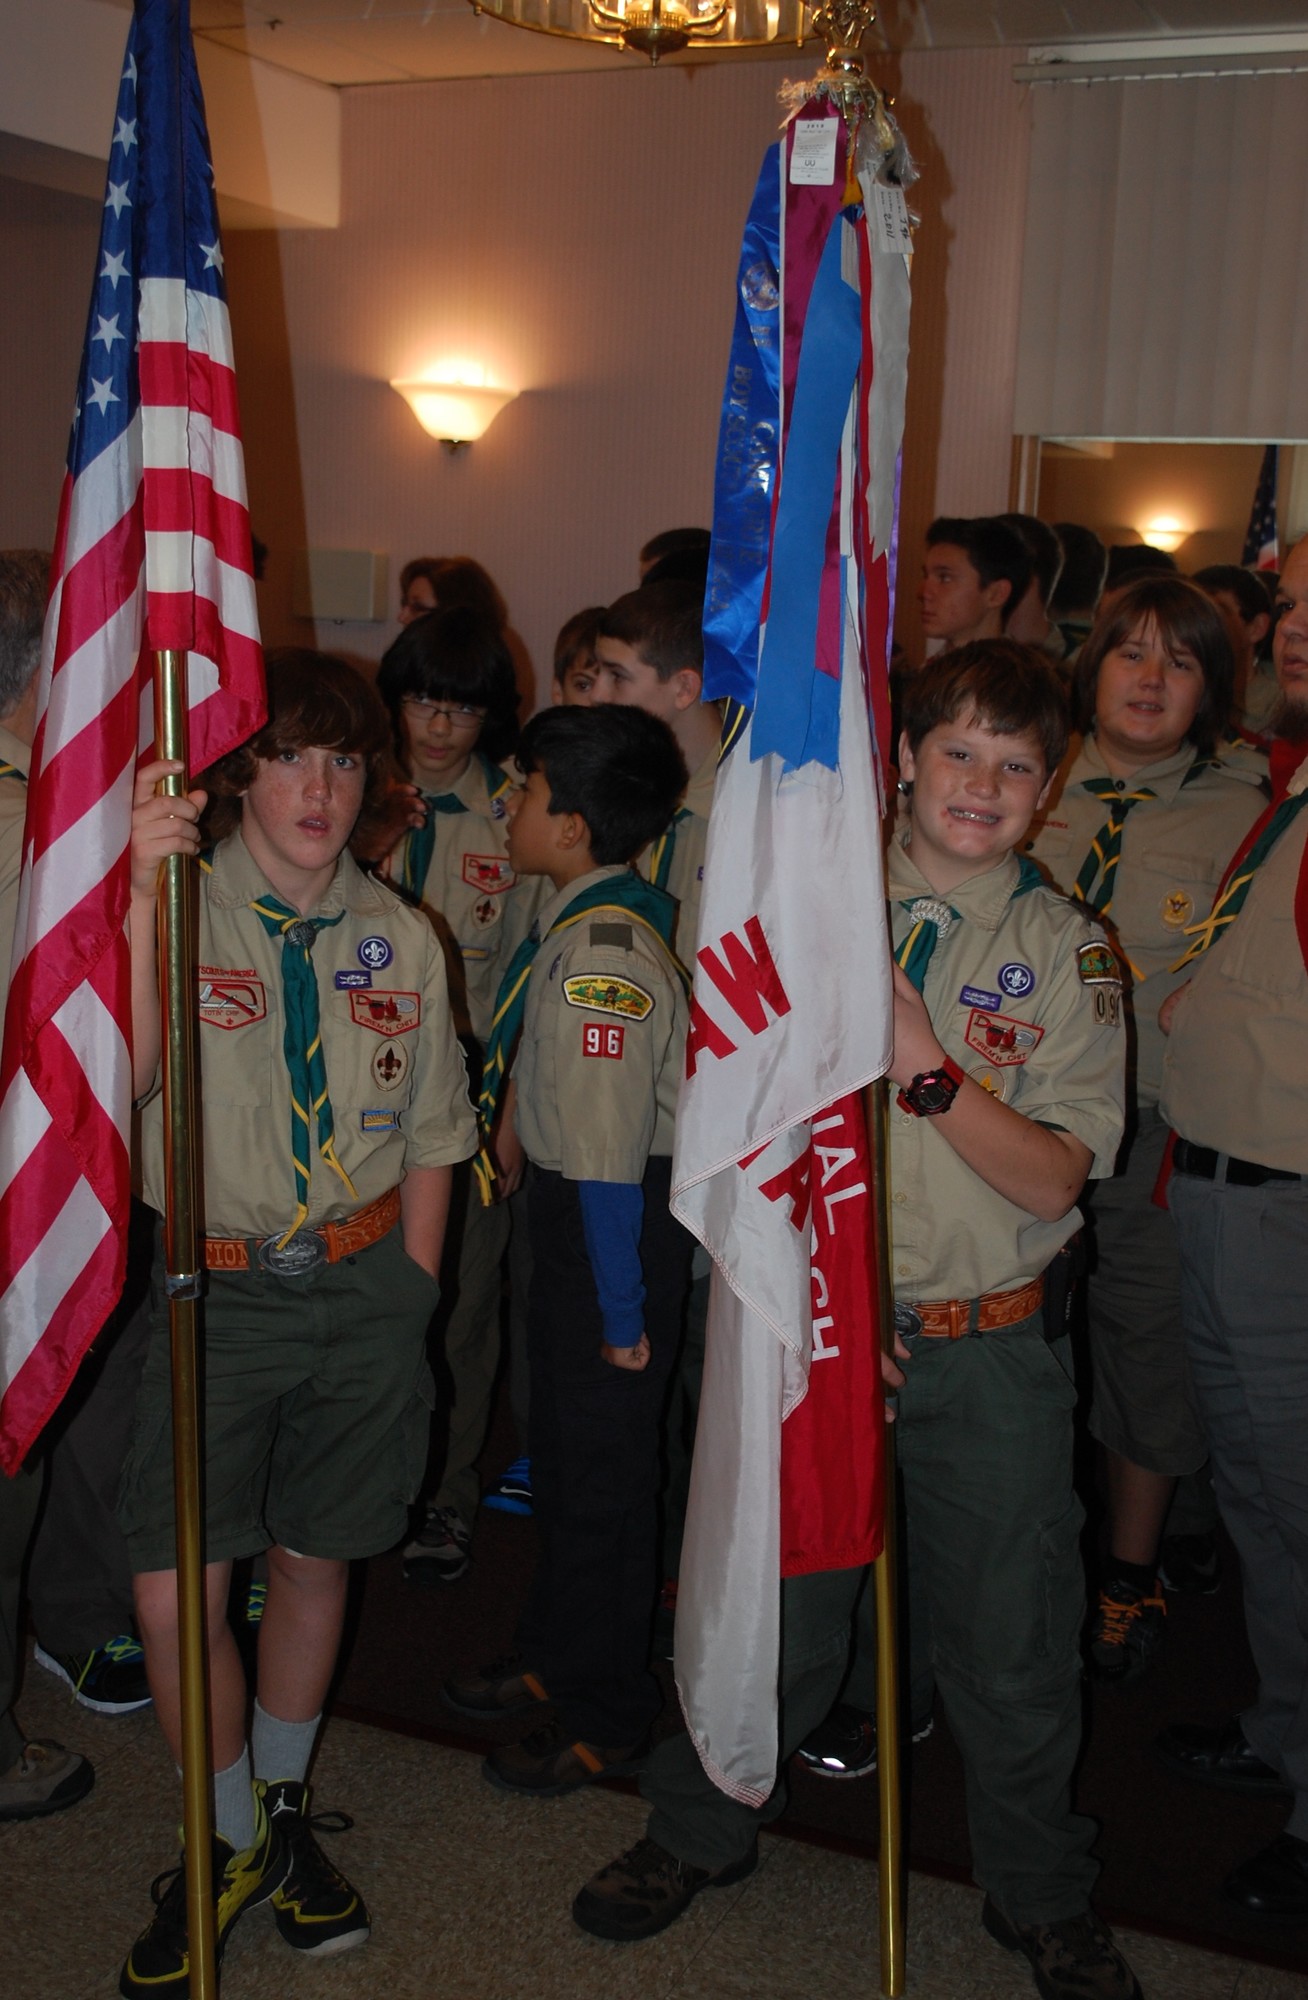 Boy Scouts from several troops took part in the ceremony.